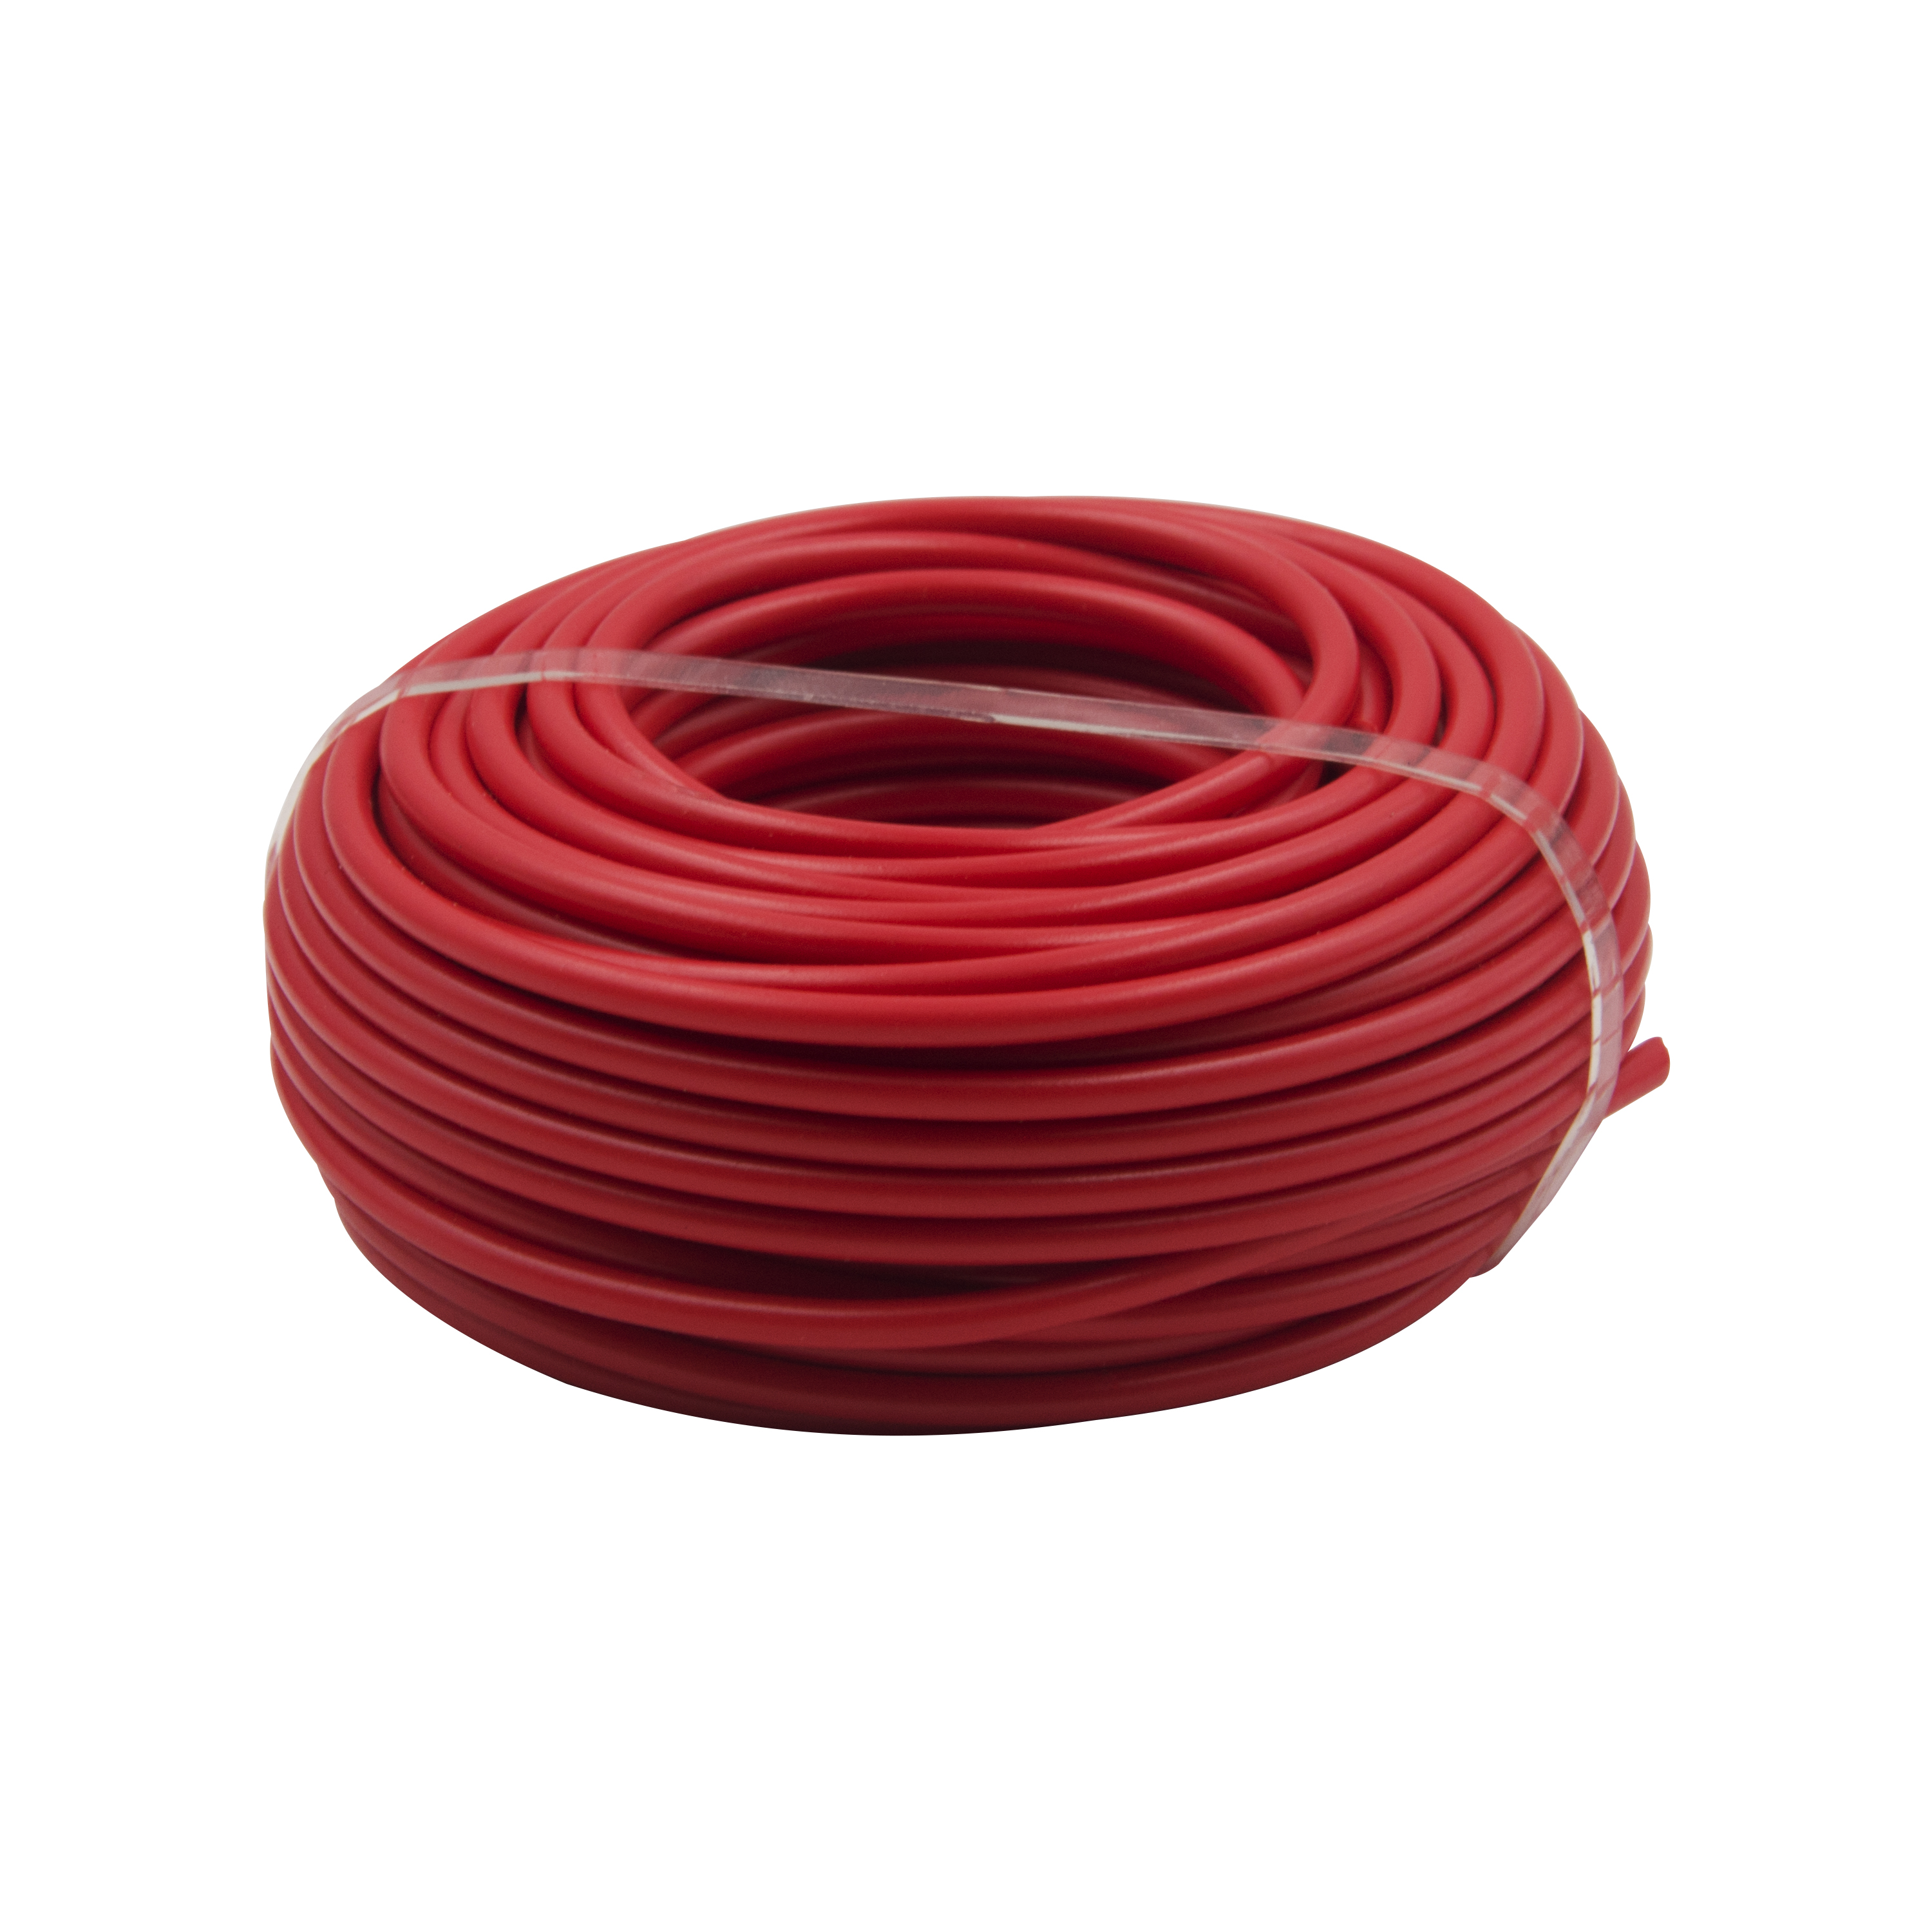 EverStart Universal 12-Gauge Auto Wire, Red, 12 feet, Light Swith to Fuse Block or Relay for Car - image 1 of 8